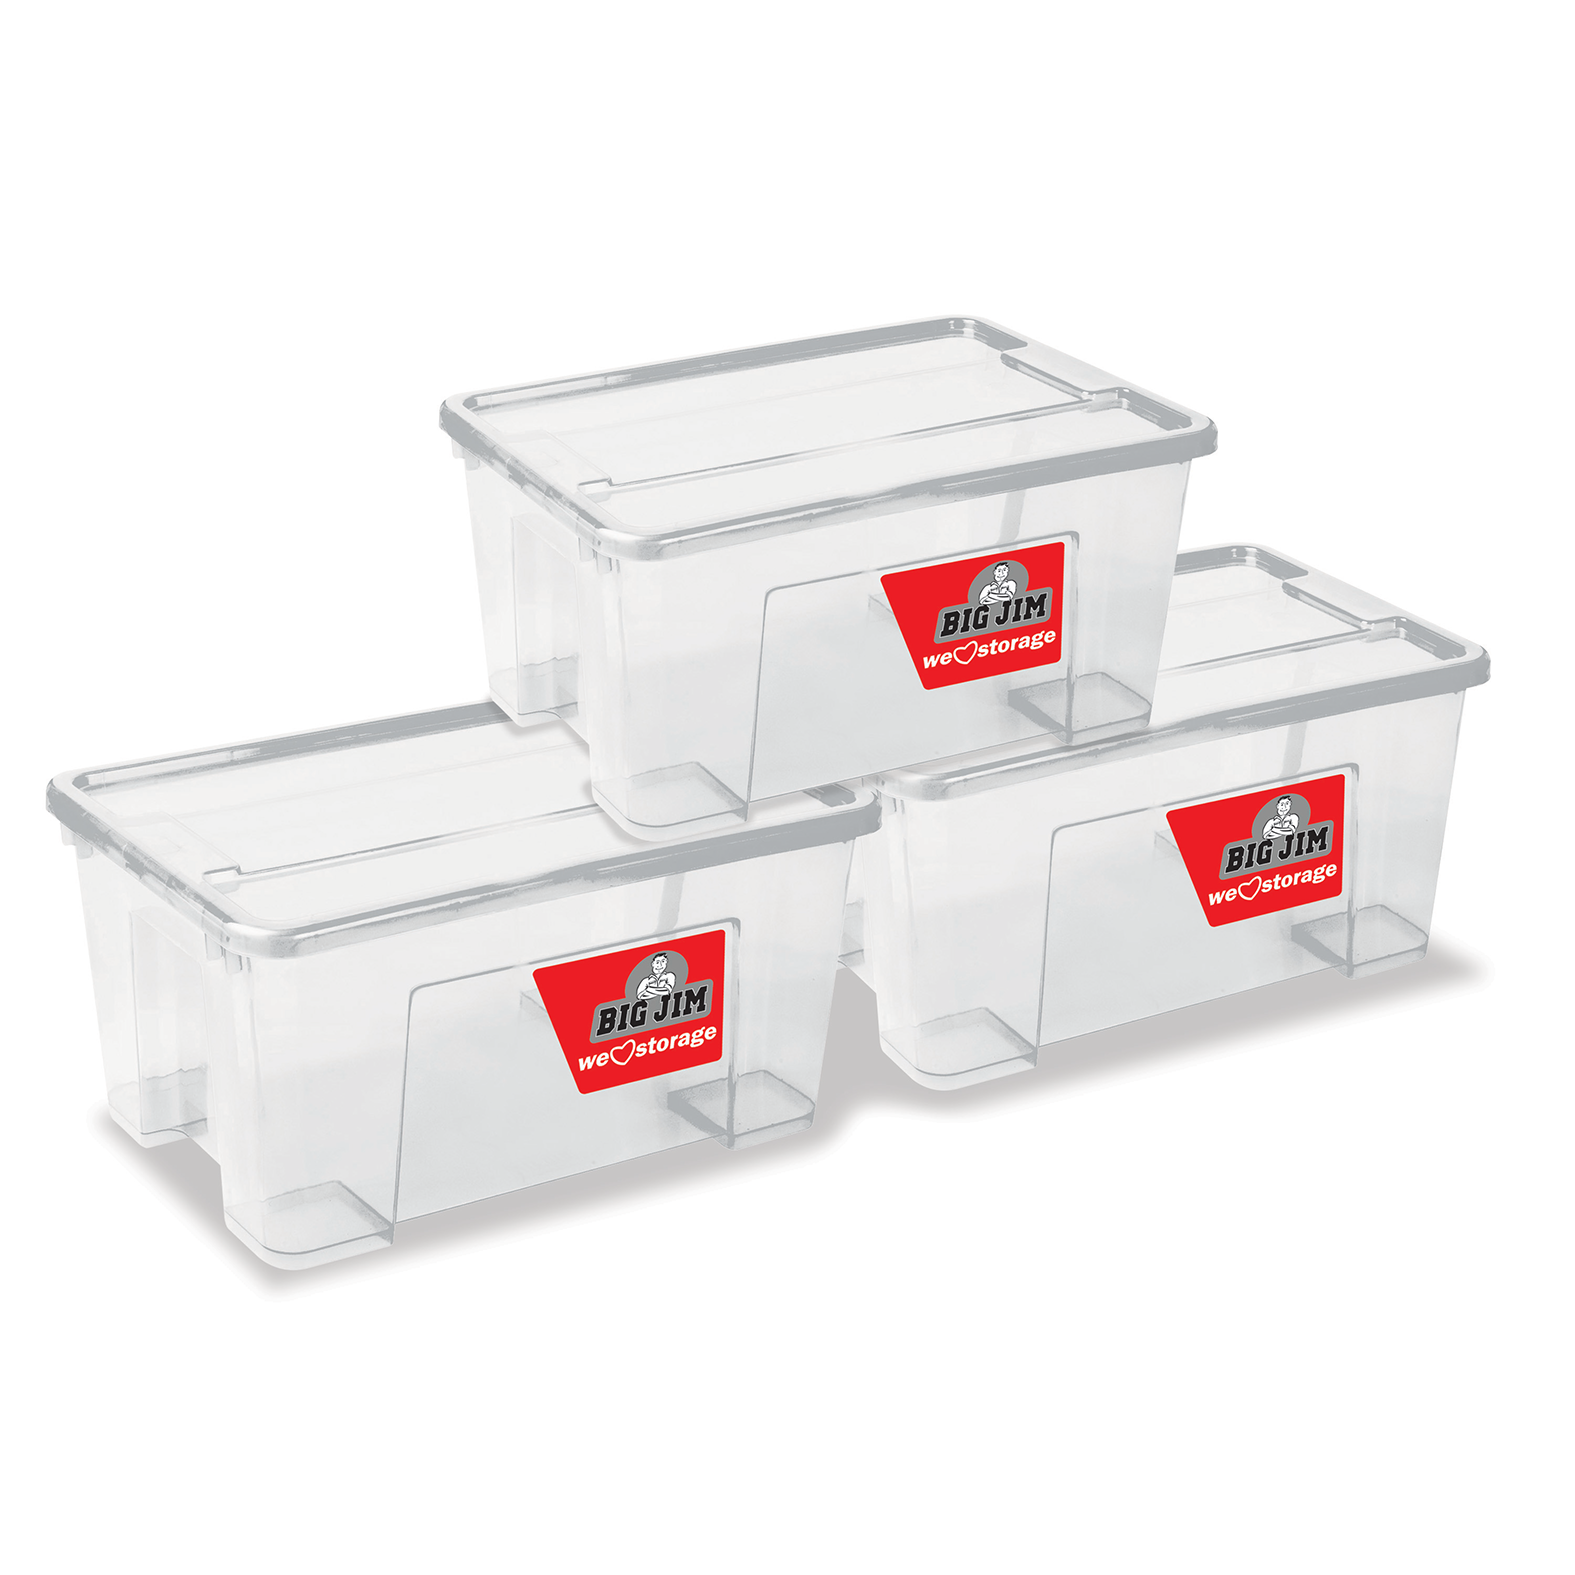 Capacity - 3 x 13 Litres. Made From Bpa Free Virgin Polypropylene Material. Designed To Fit Together In An Efficient Way. Easily Stacked For Storage. Light weight Making It Easy To Handle.